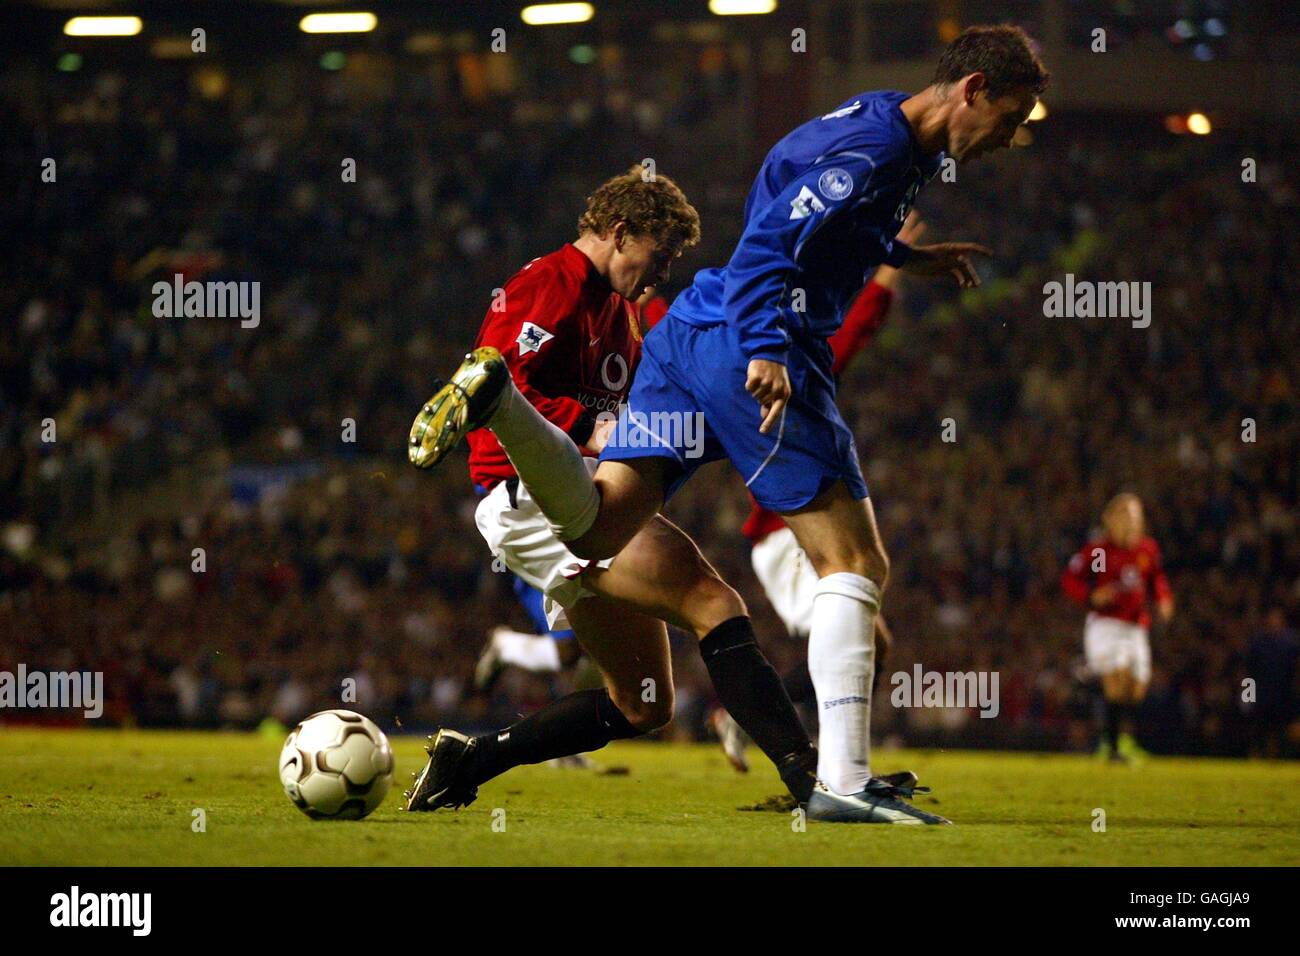 Soccer - FA Barclaycard Premiership - Manchester United v Everton. Everton's David Weir brings down manchester United's Ole Gunnar Solskjaer to earn his red card Stock Photo